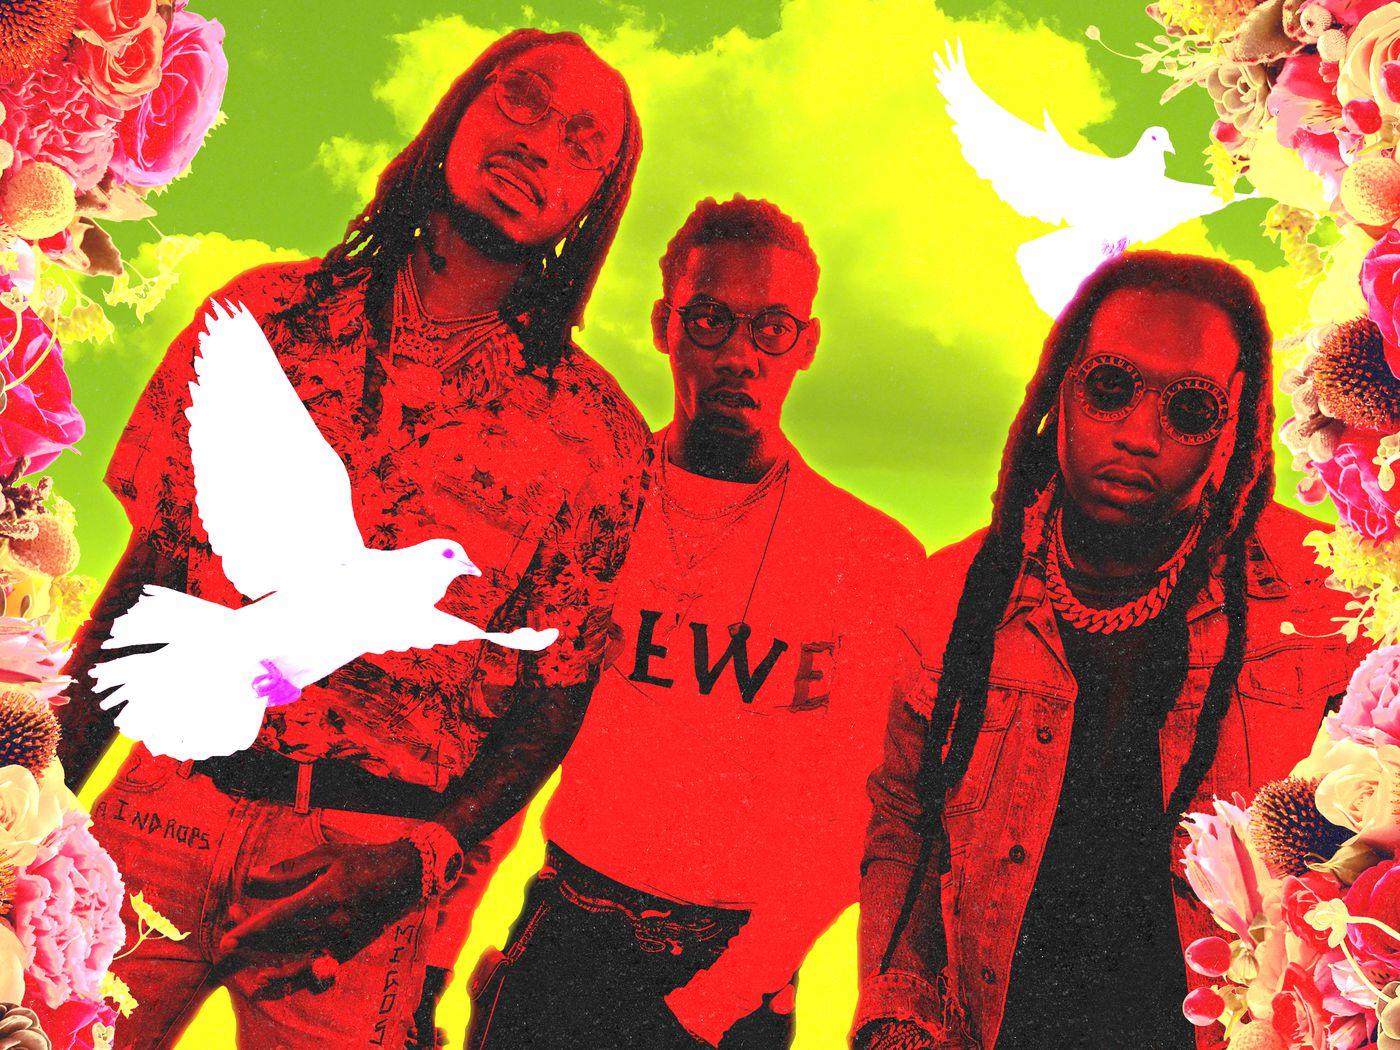 Which of the Migos Won 'Culture II'?